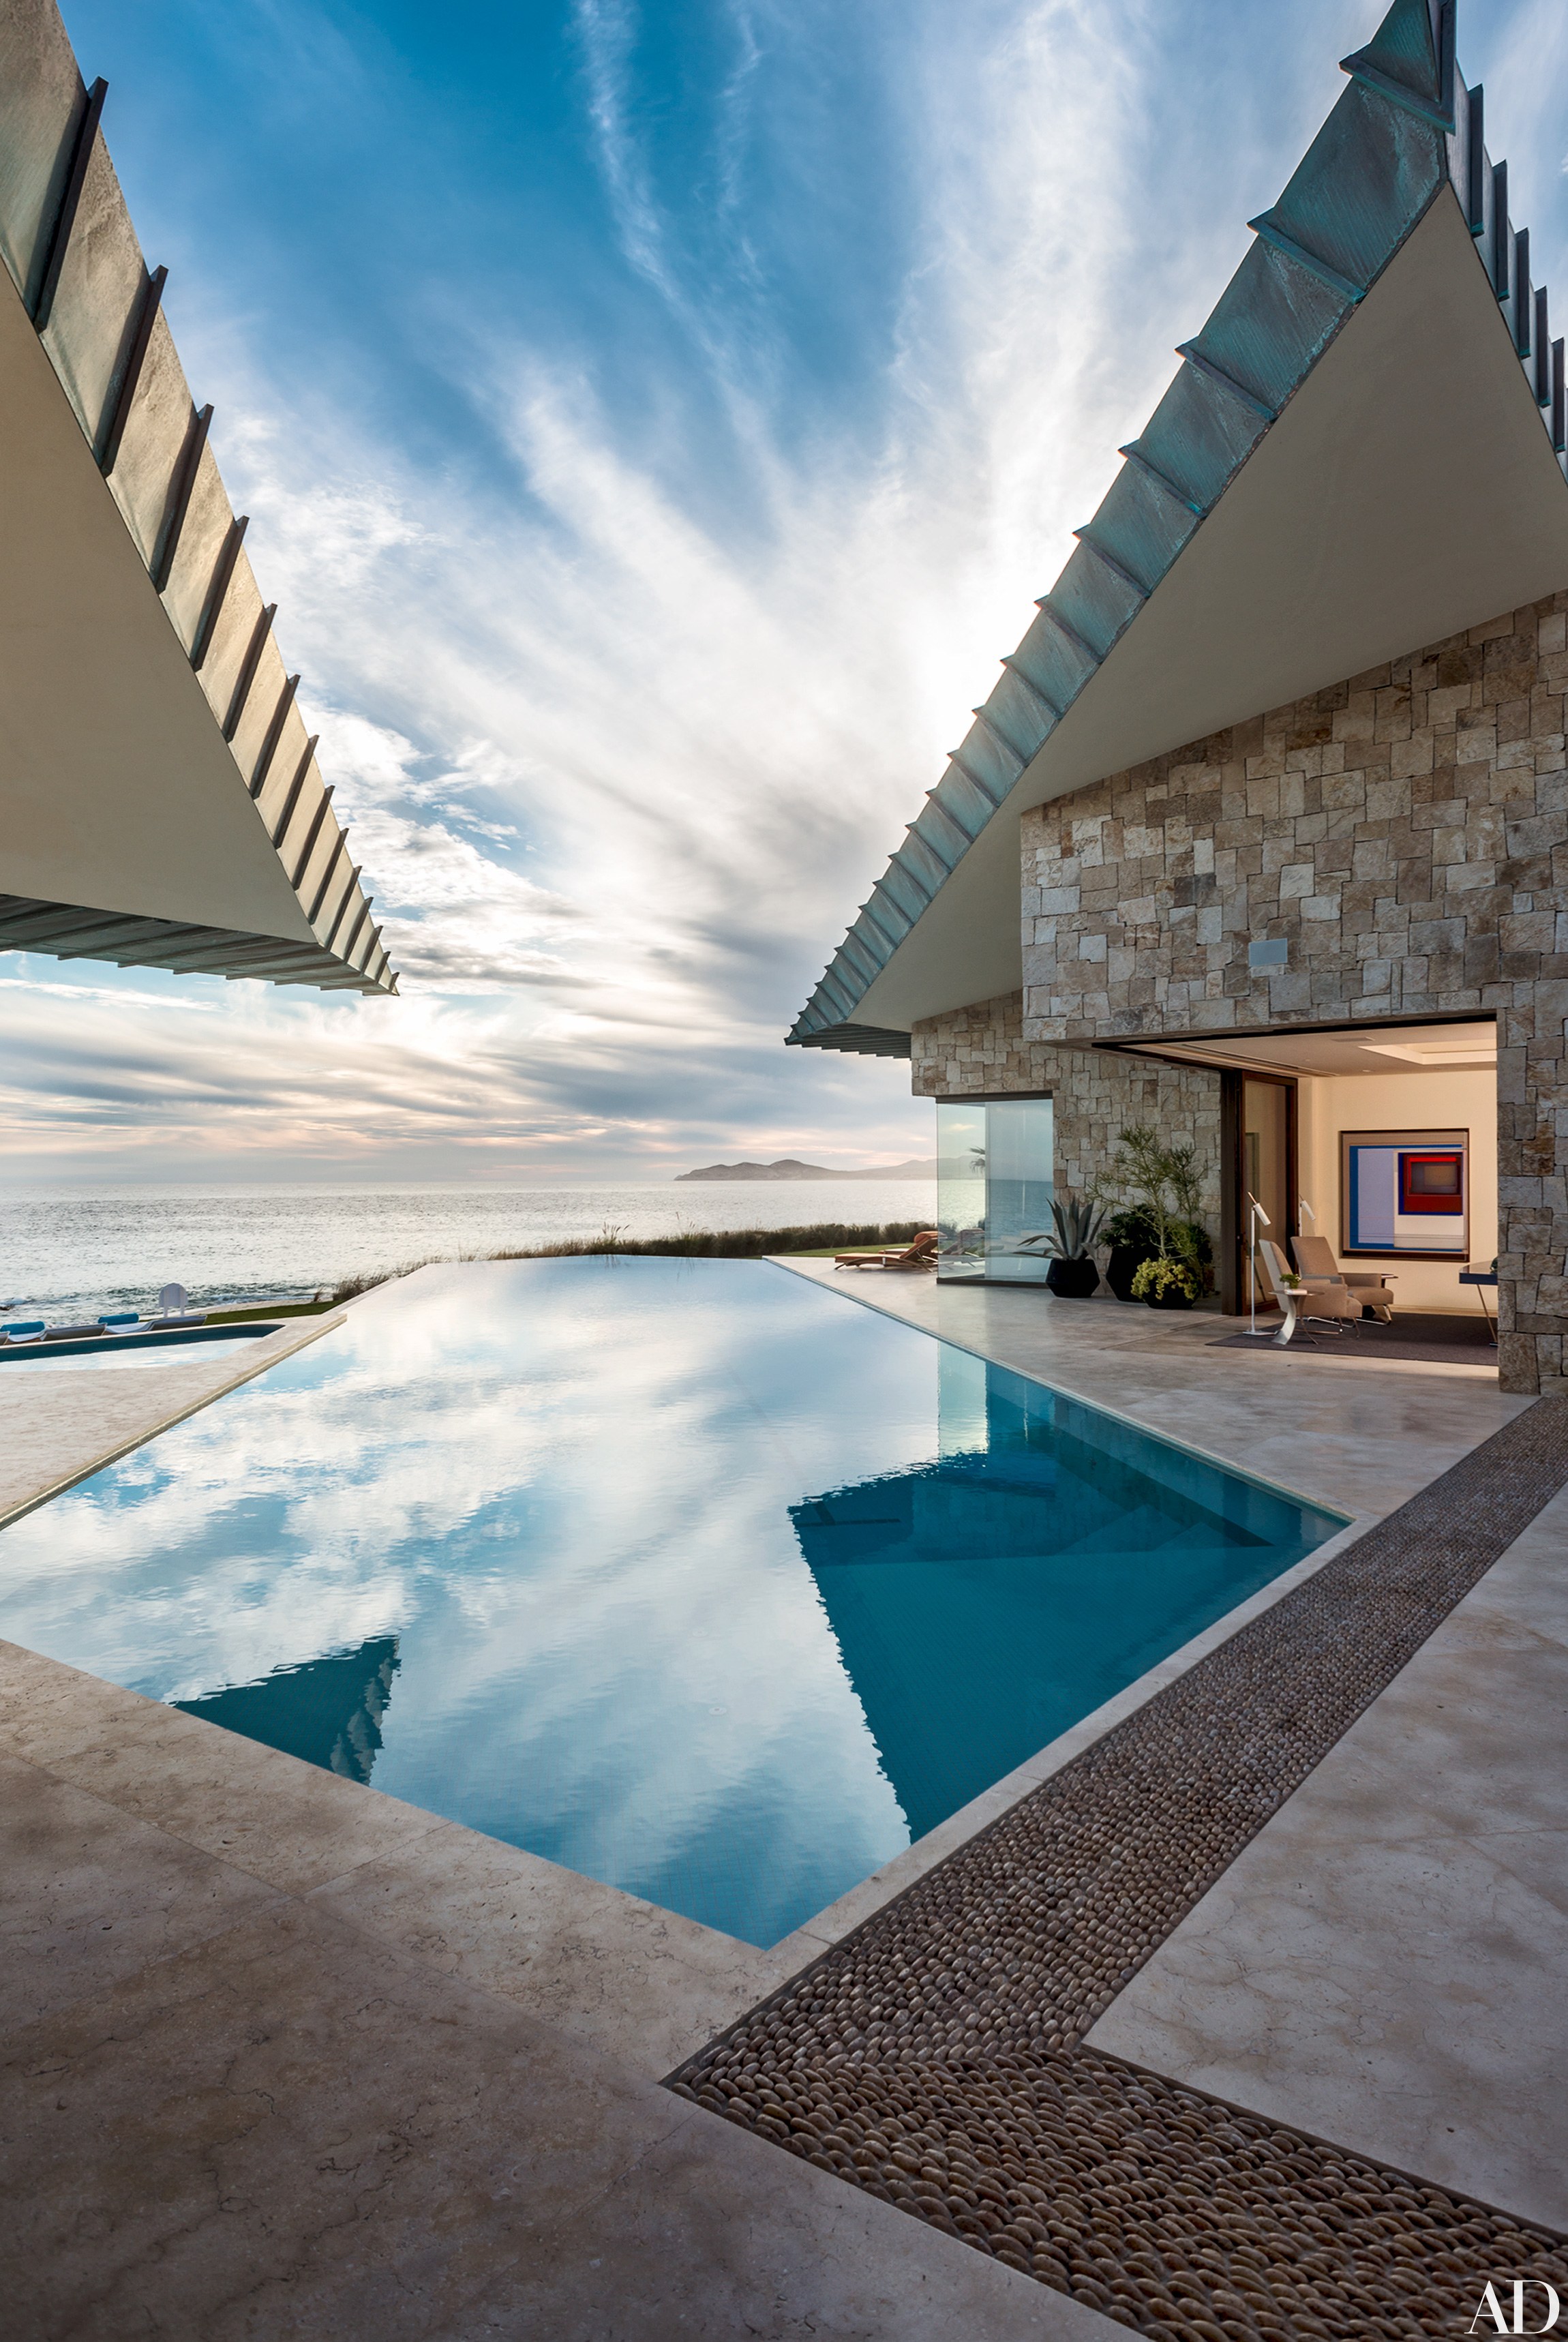 Mexican architect Diego Villaseñor conceived this geometric Venetian-tiled pool at a compound in Los Cabos to take advantage of the site’s spectacular ocean views. The marble terrace connects two copper-roofed pavilions.